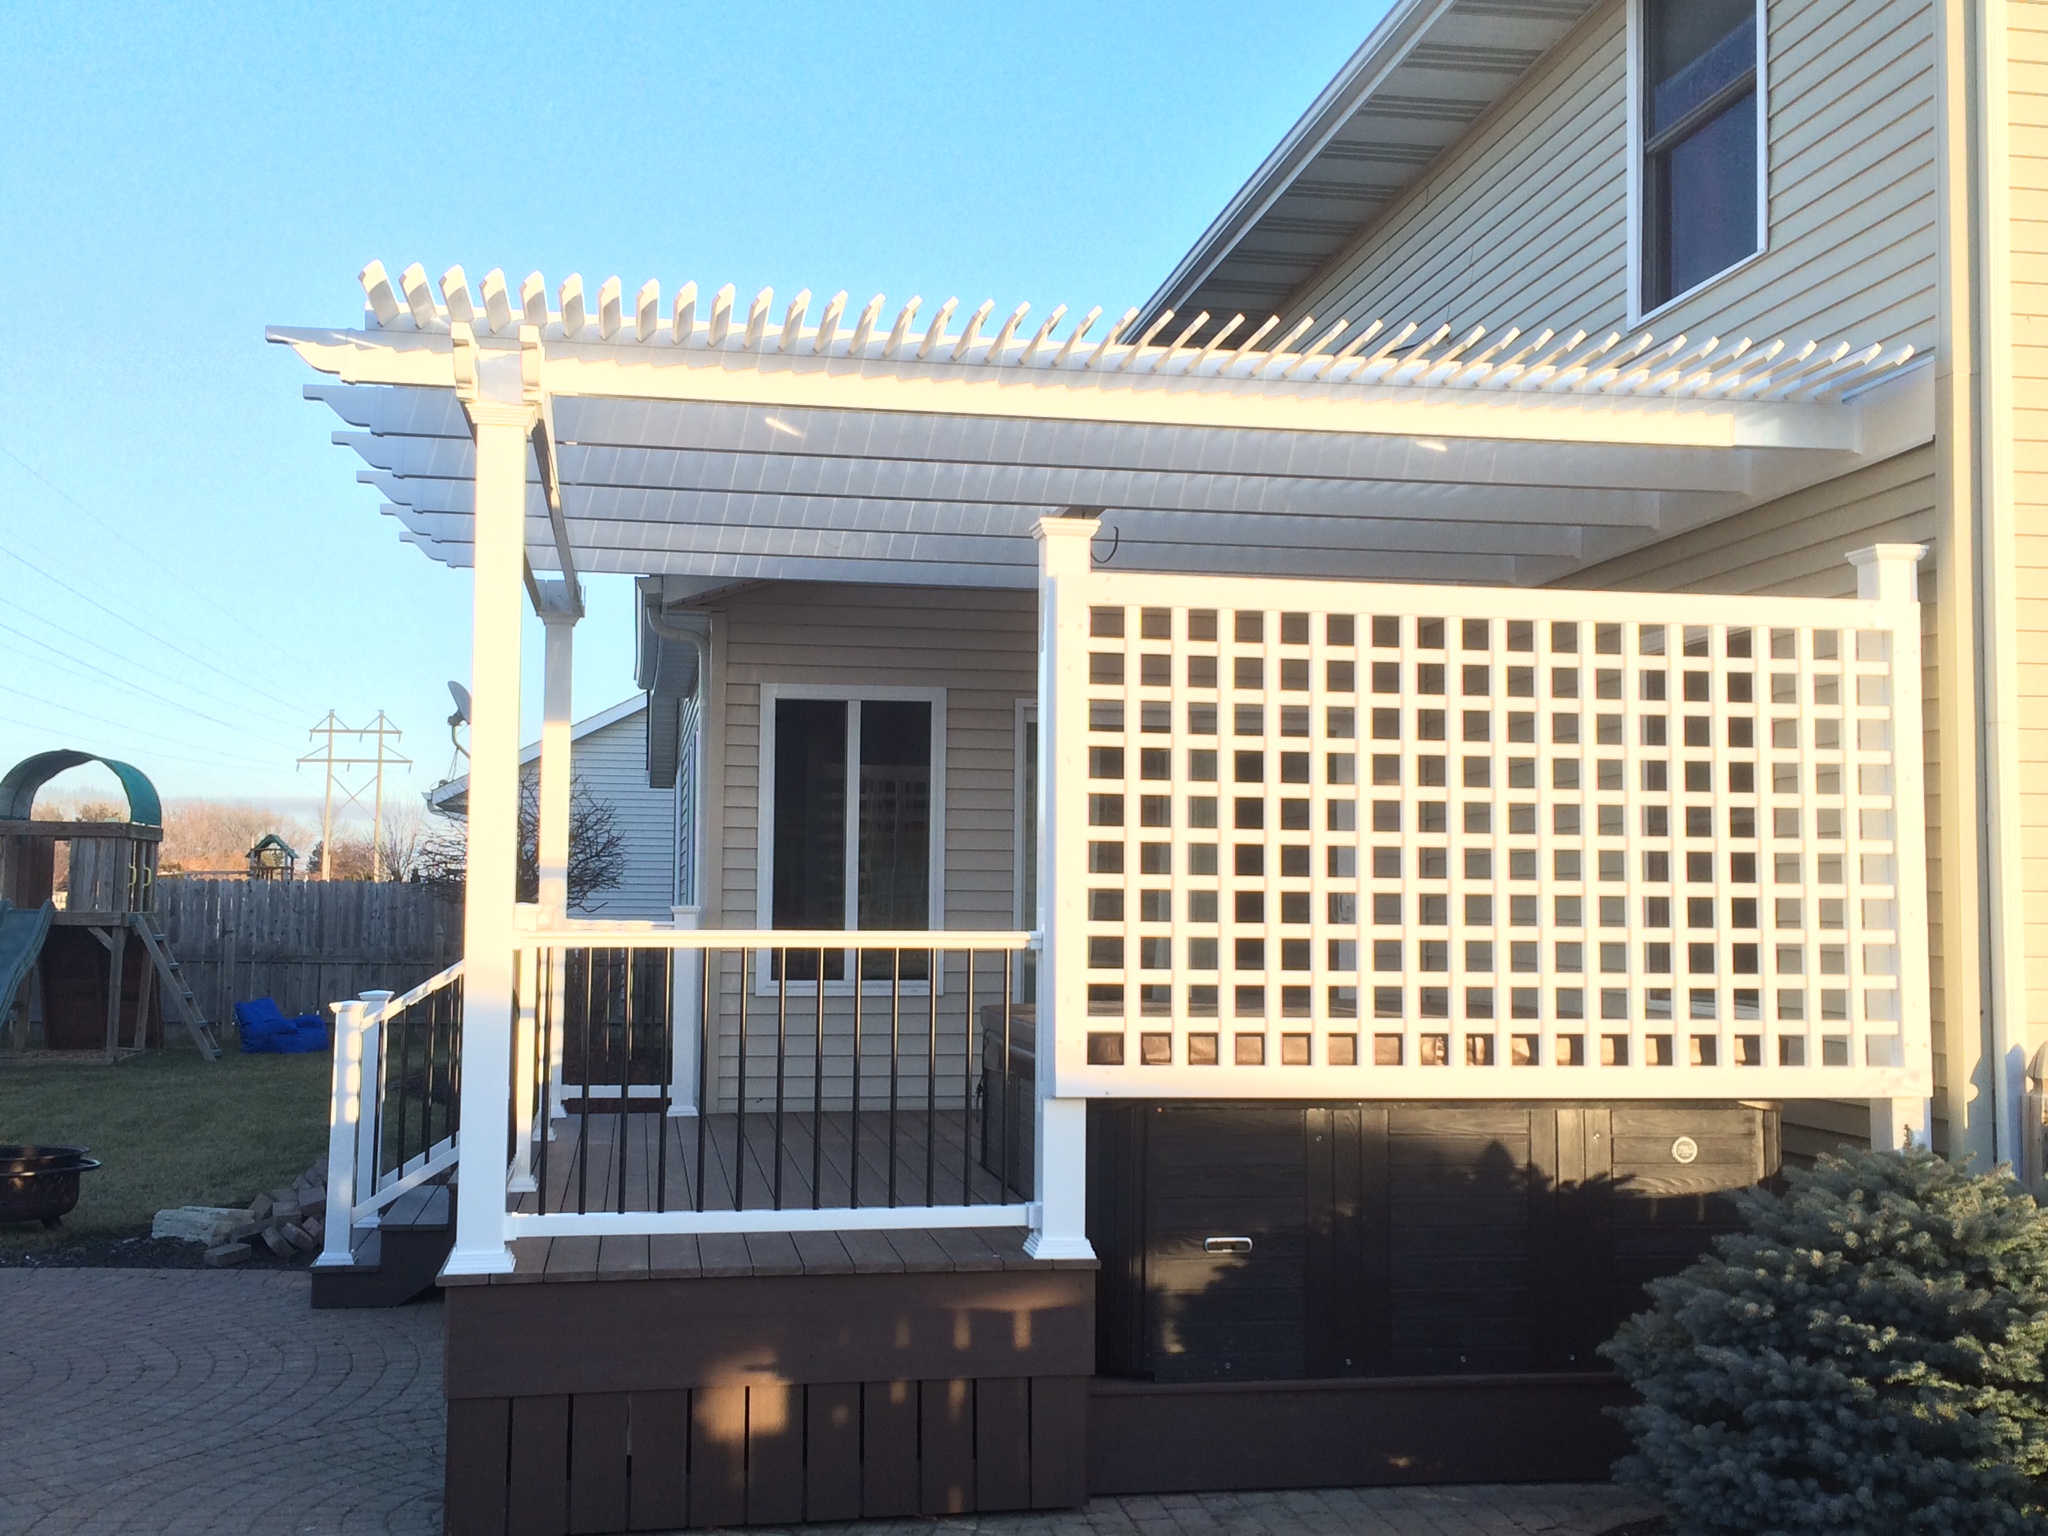 This two-story home with tan siding has a white pergola attached to the porch. There is a privacy trellis on the side of the deck, and there is a playset in the backyard.